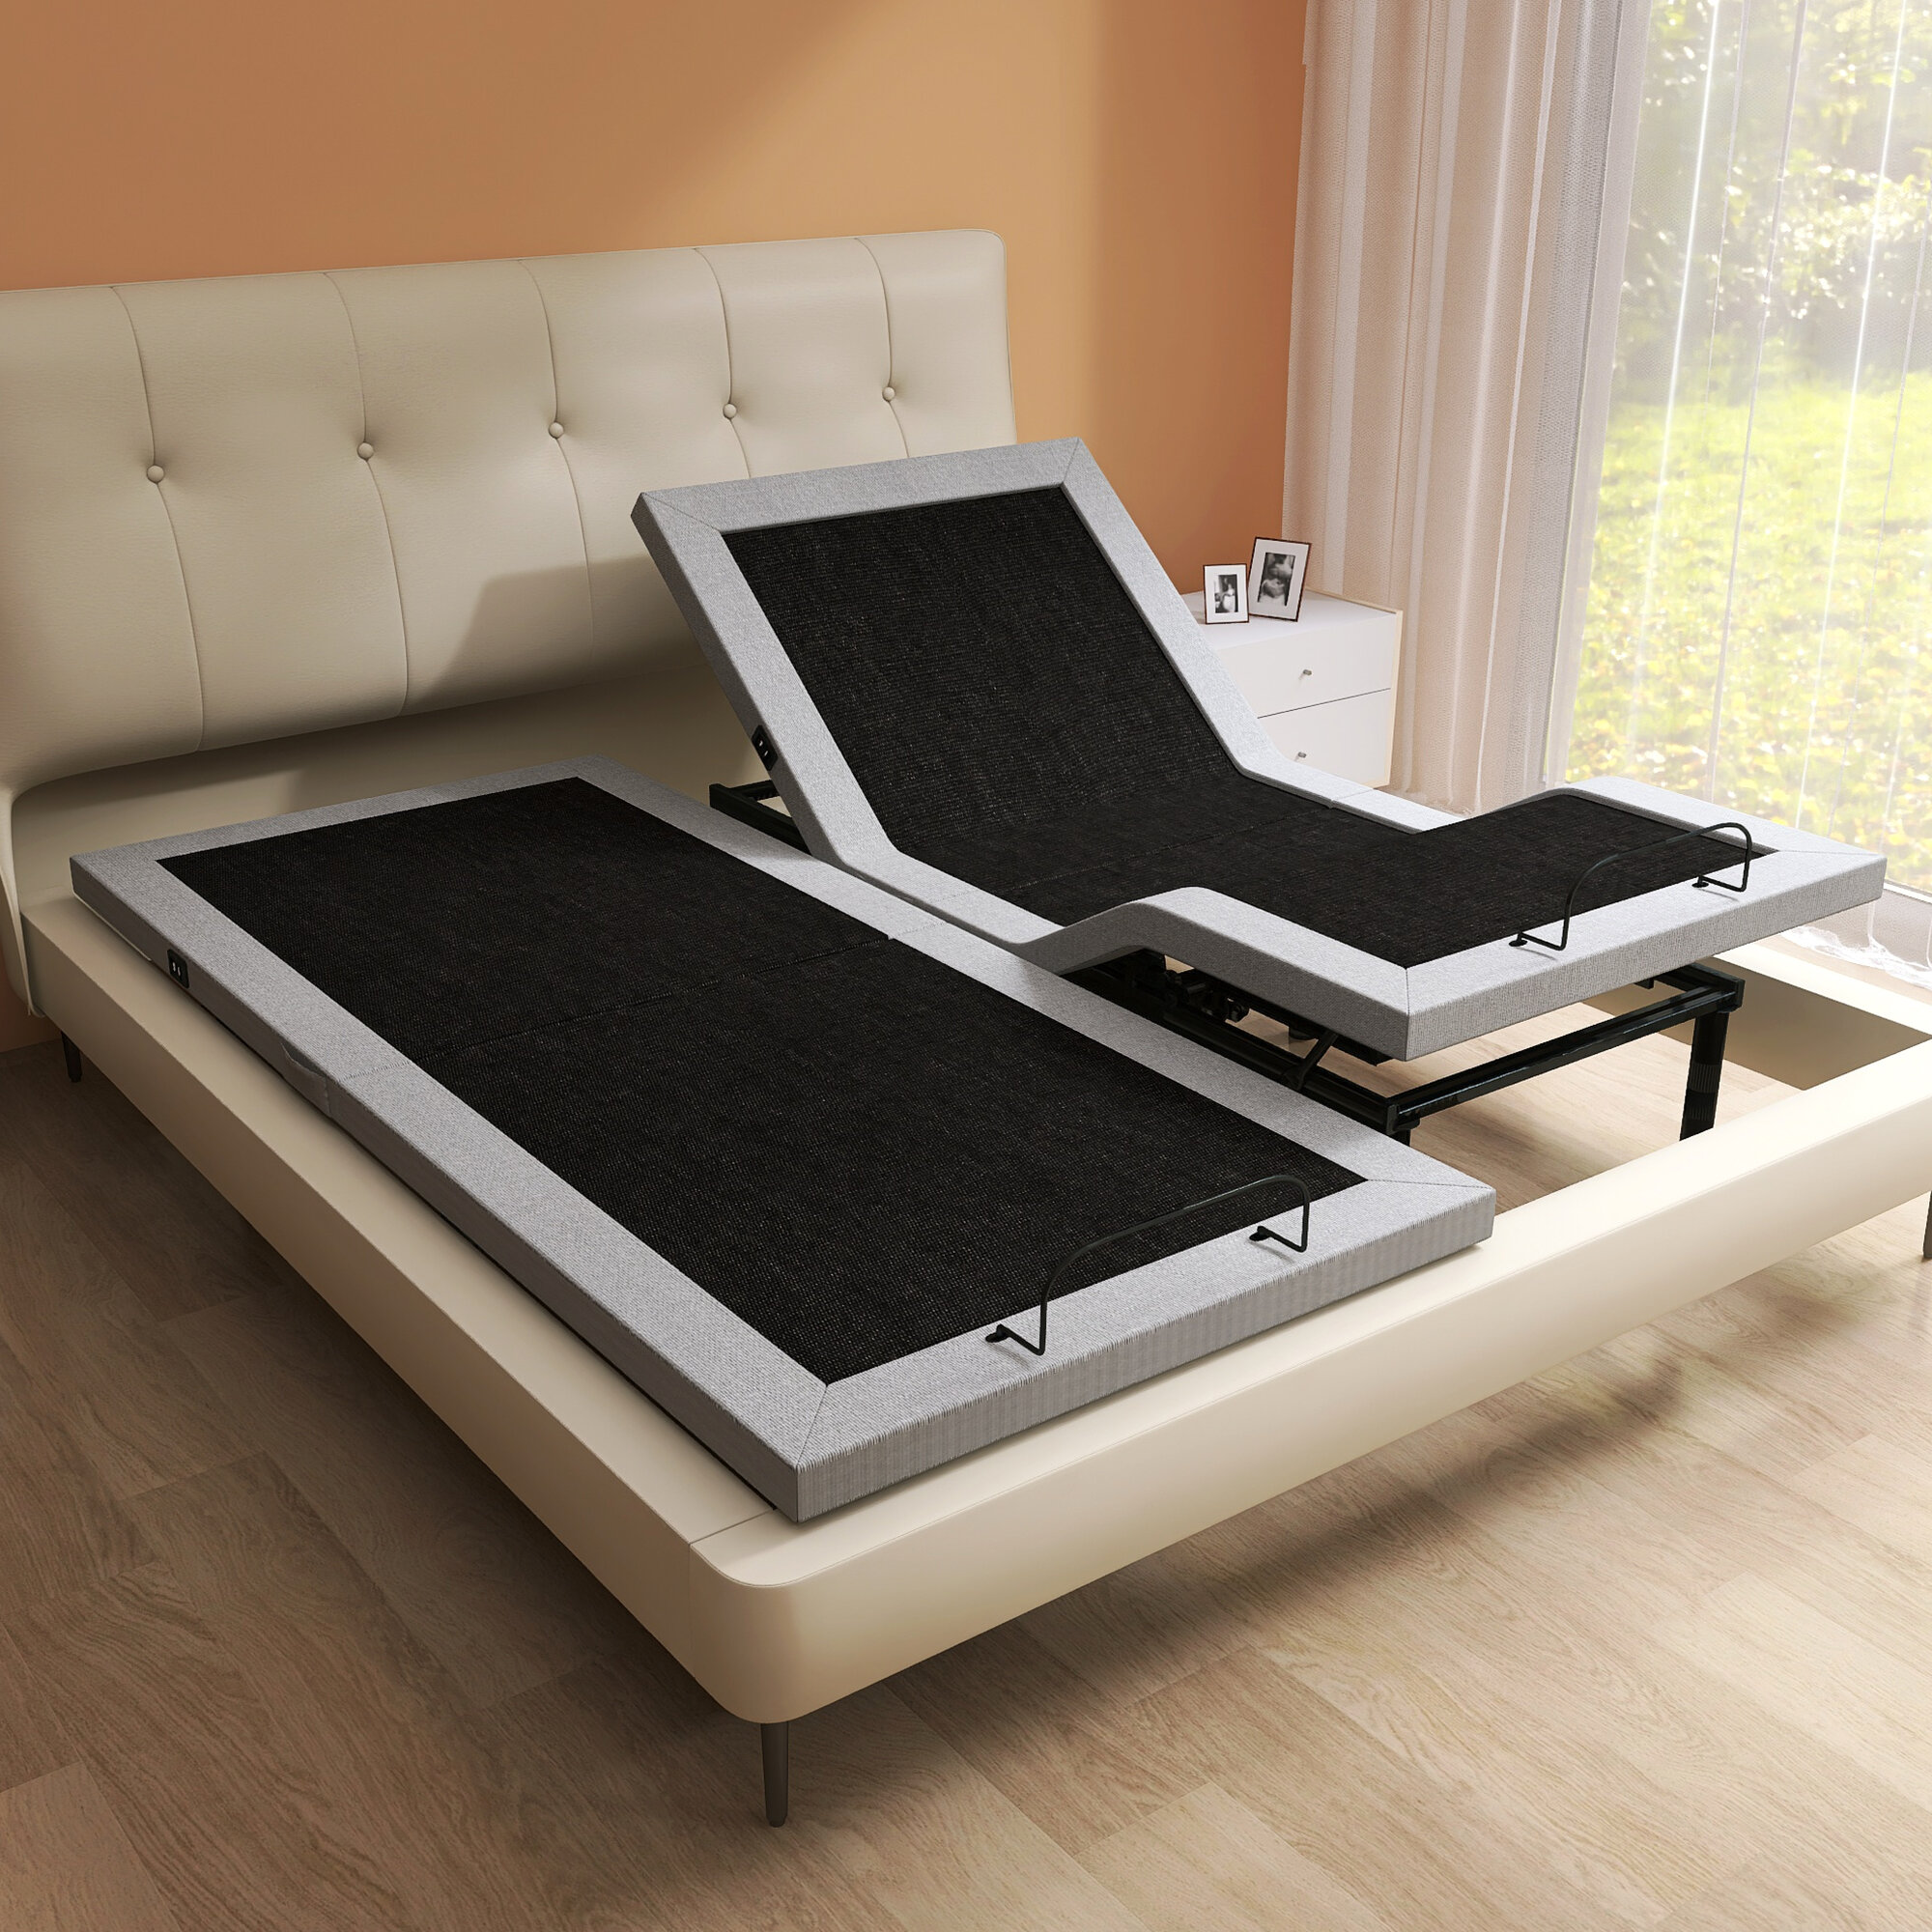 5 Problems with Split King Adjustable Beds [& How to Fix Them] - Ergomotion